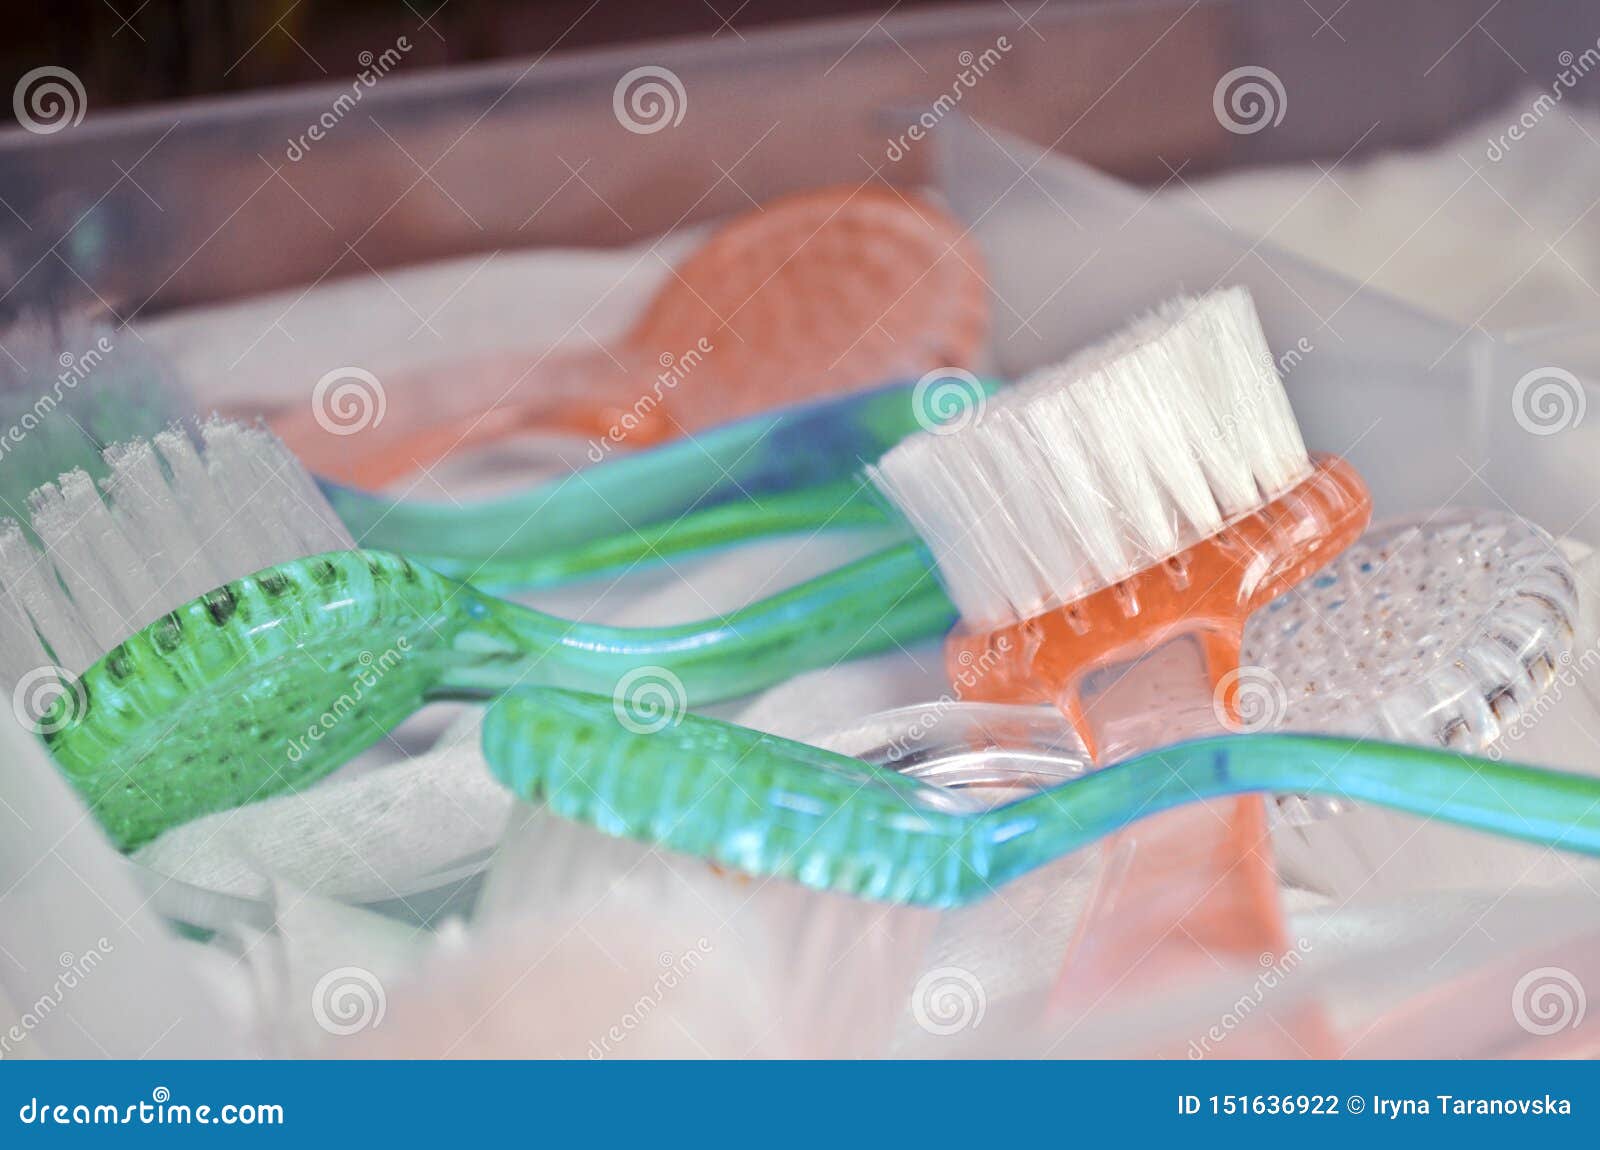 Green And Orange Brushes For Hardware Manicure And Pedicure In